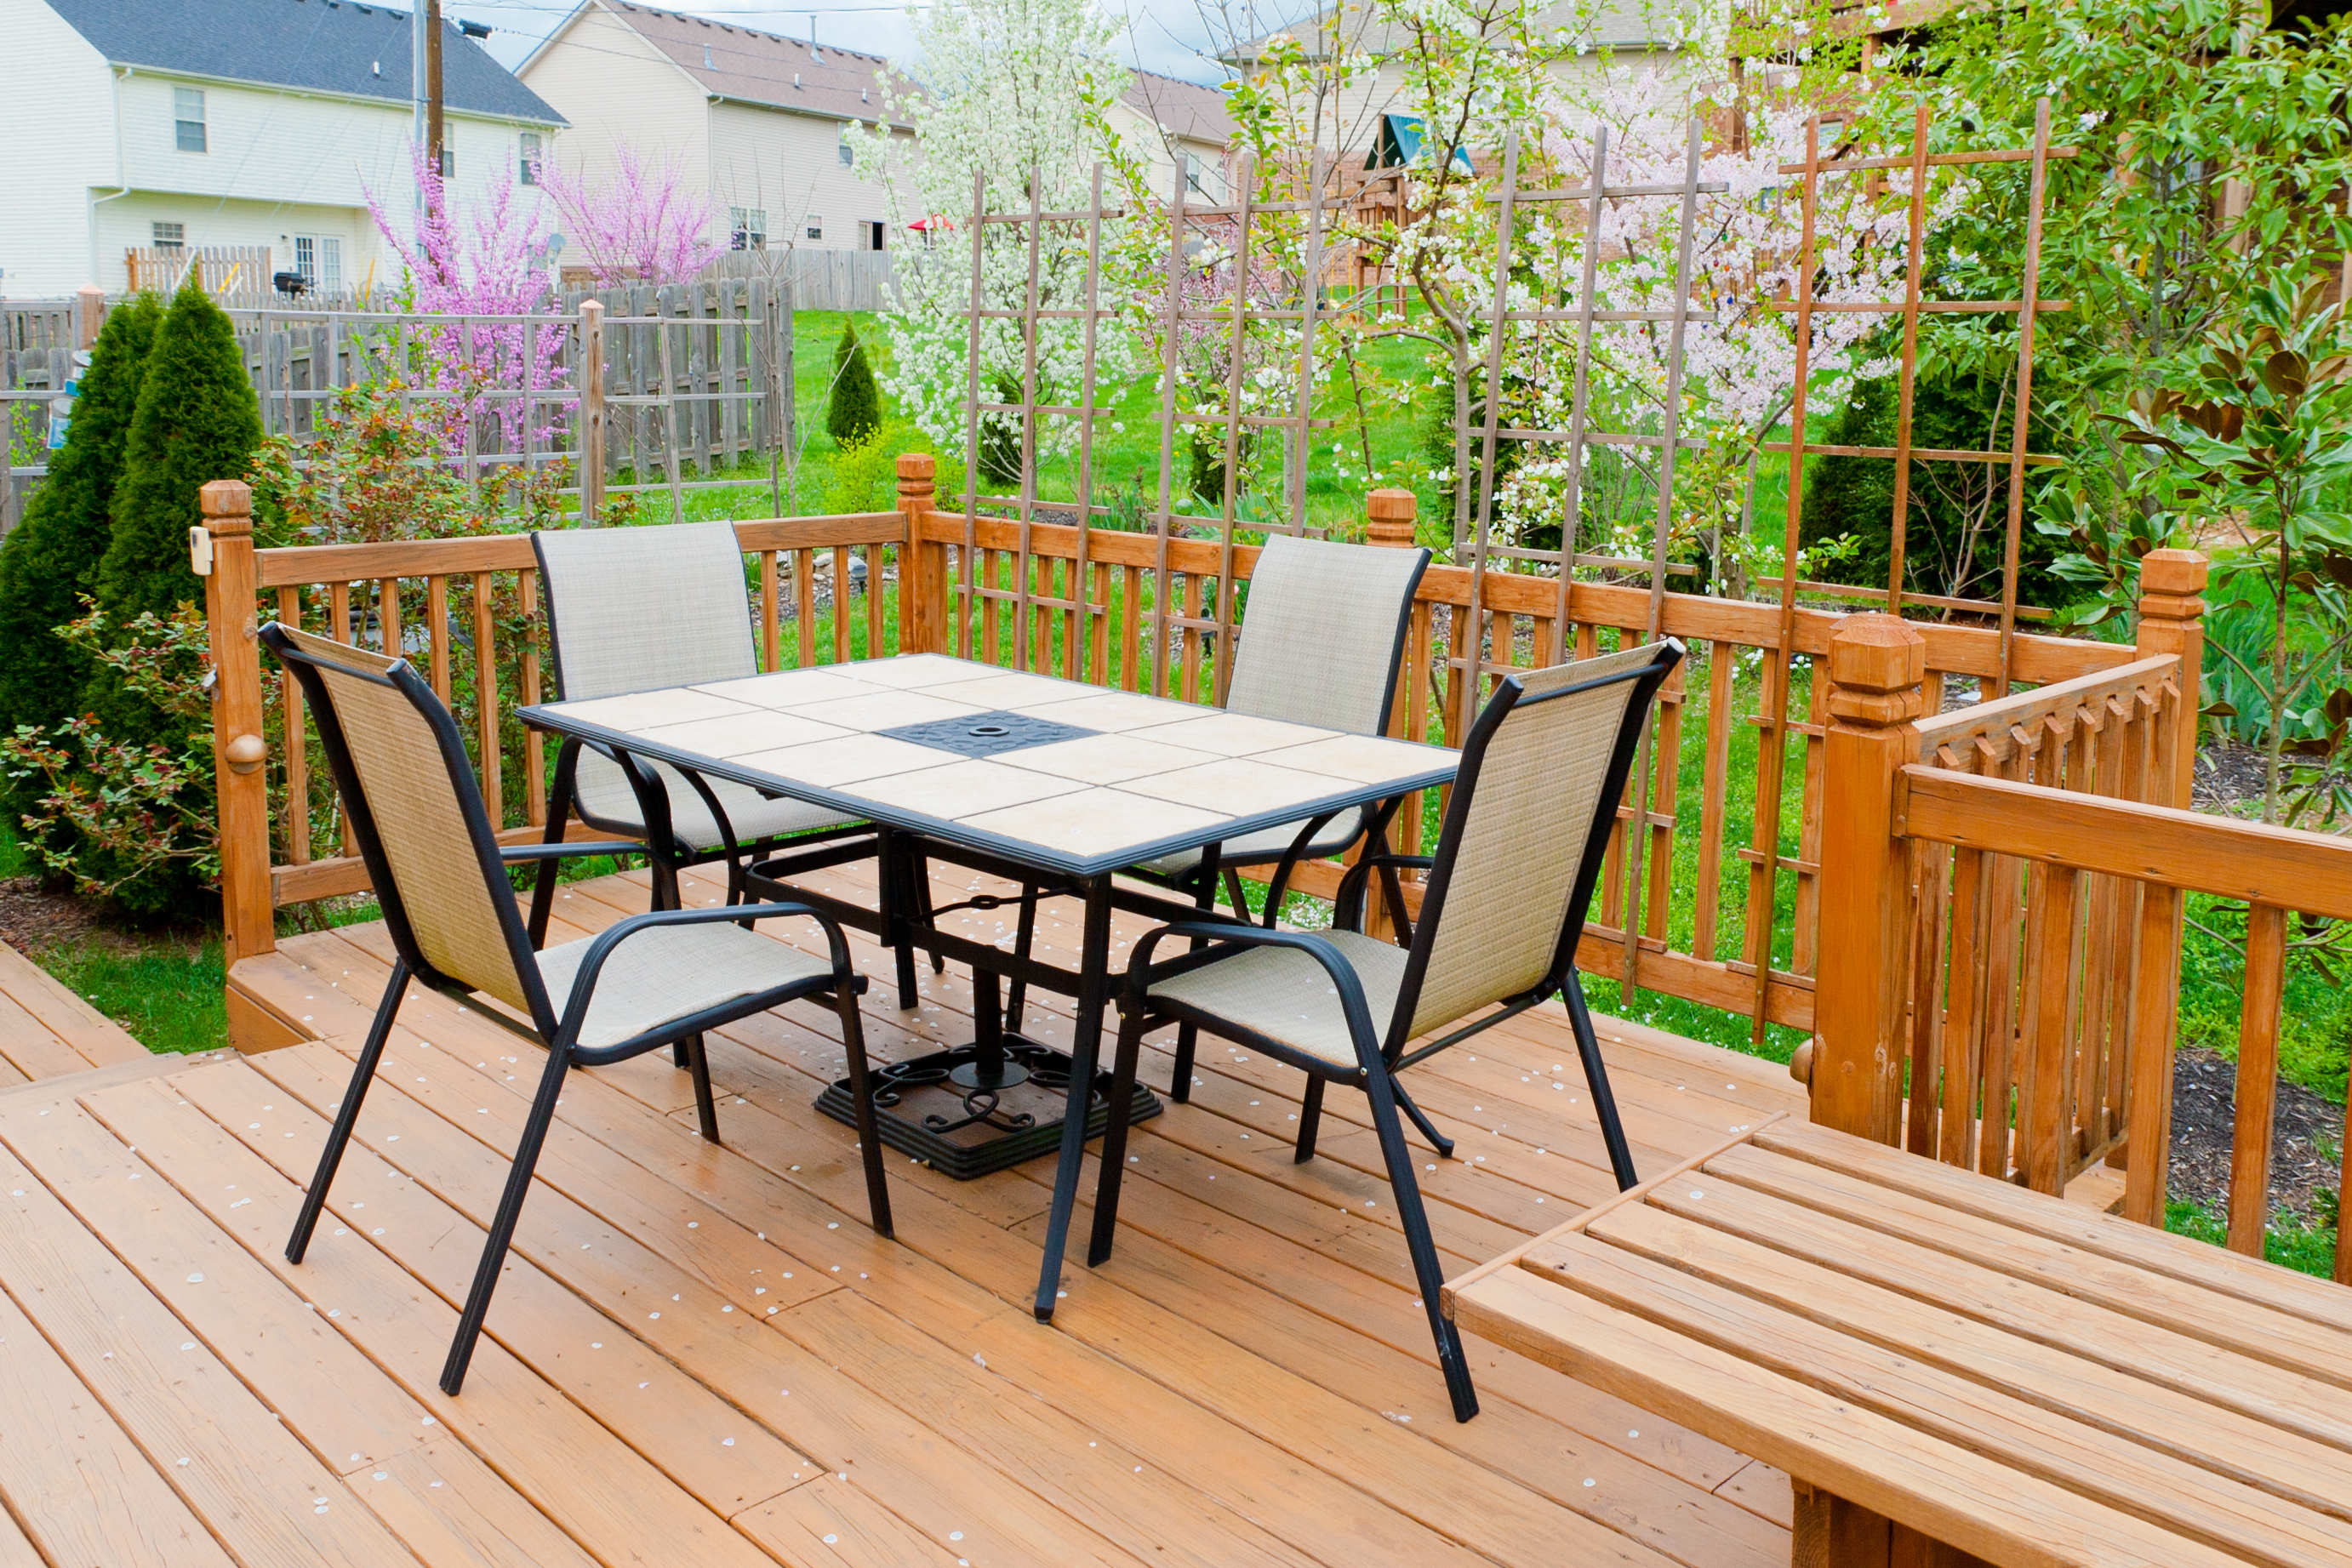 Clean table and chairs on patio in backyard